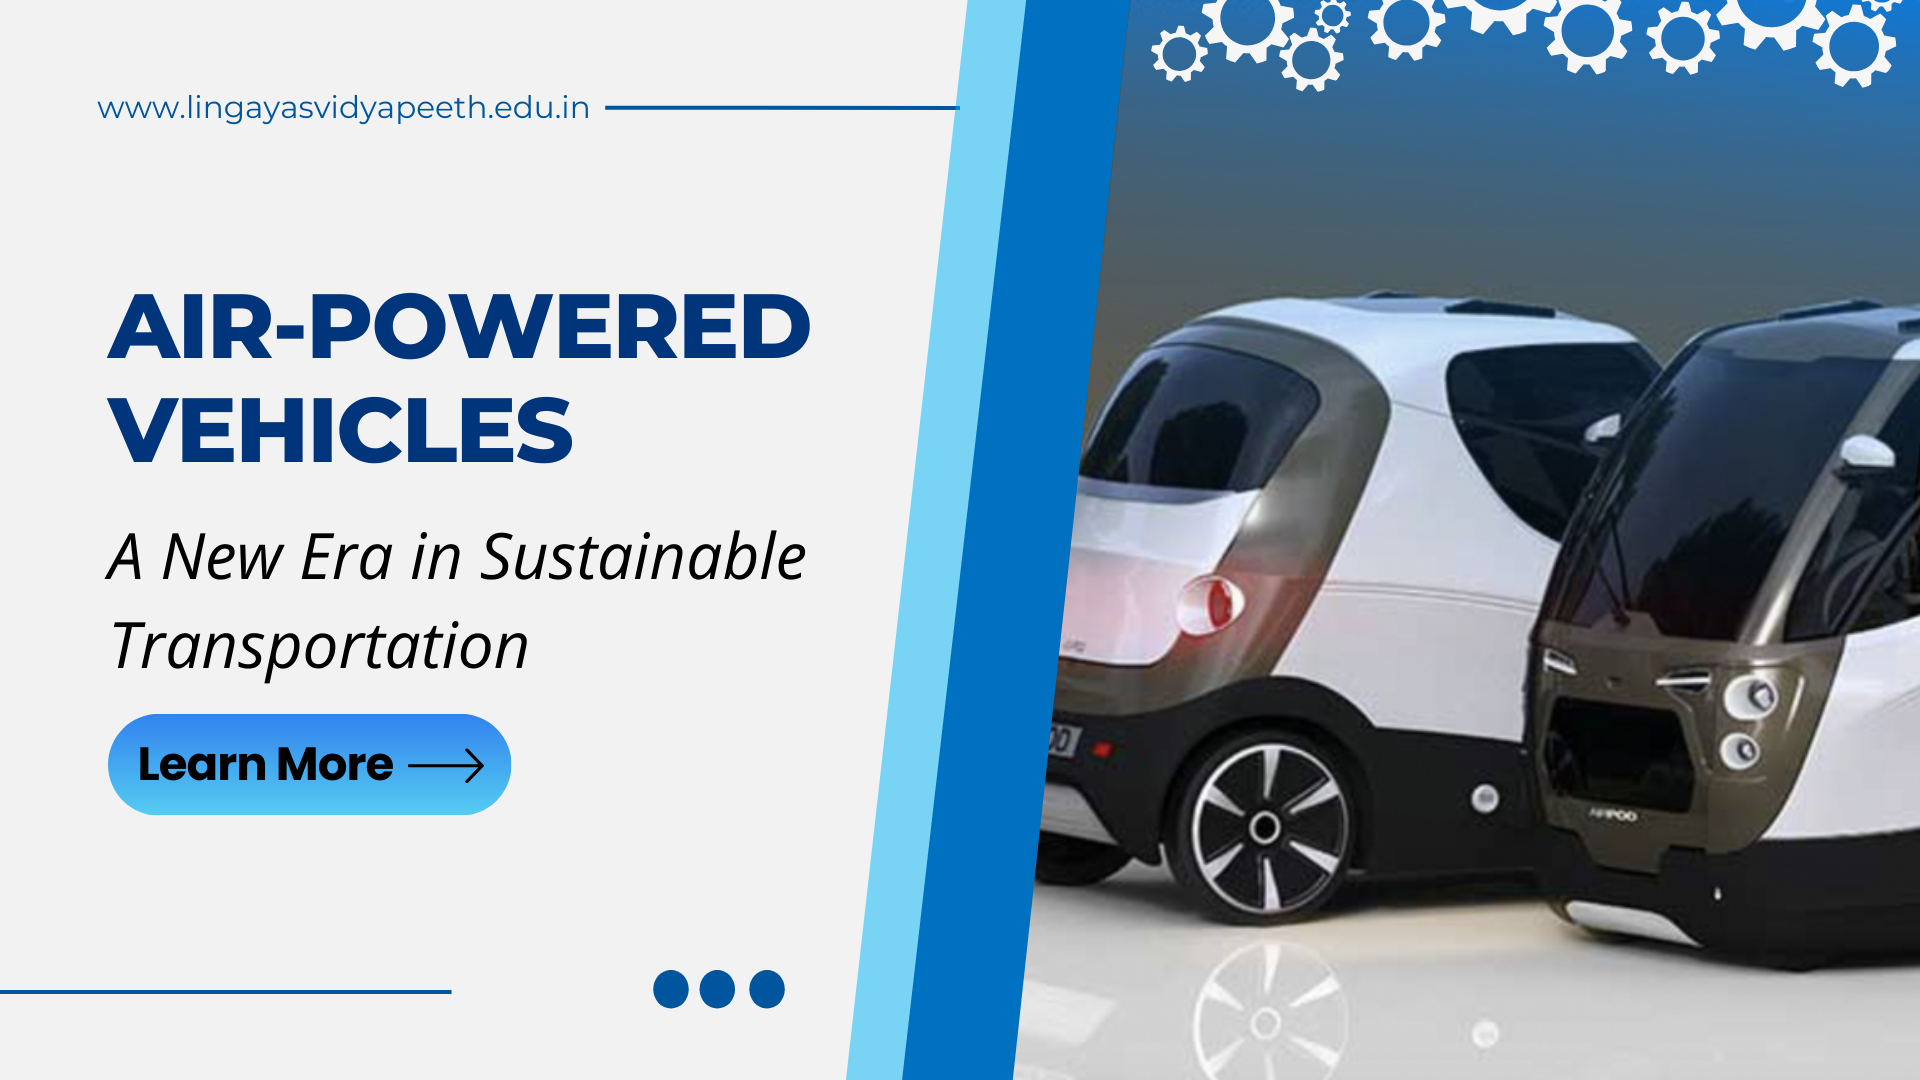 Air-Powered Vehicles: A New Era in Sustainable Transportation